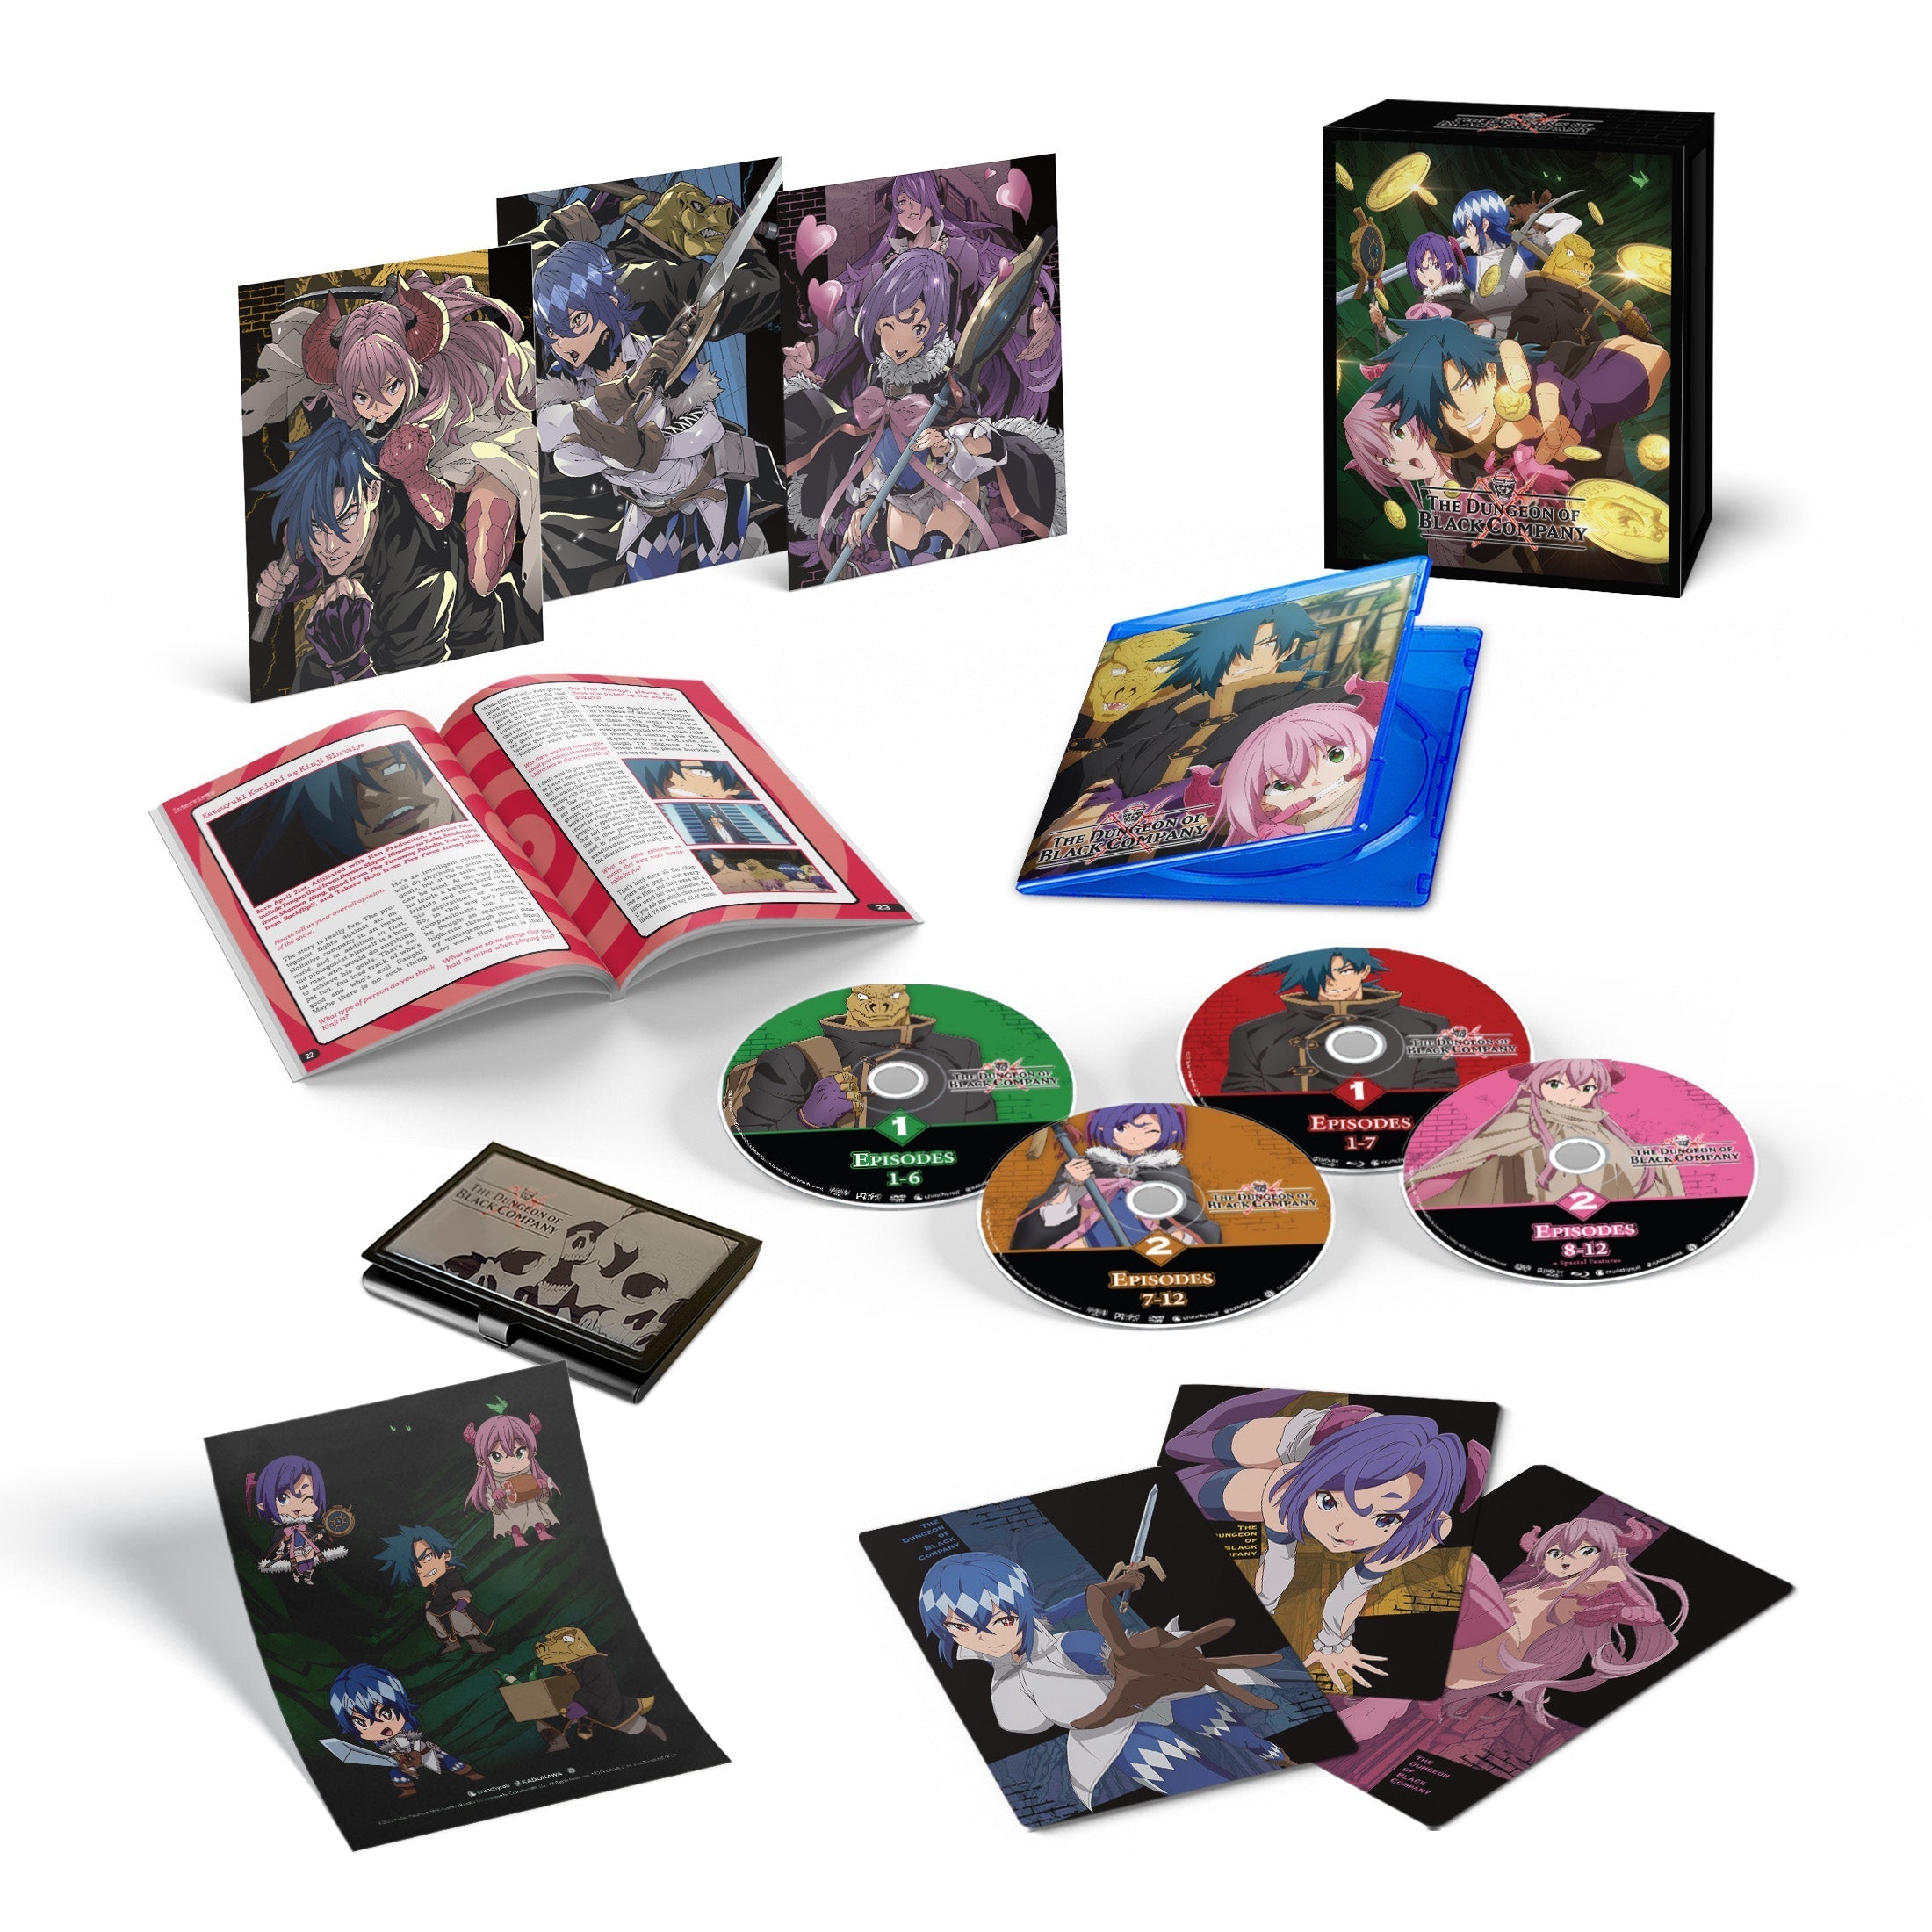 The Dungeon of Black Company - The Complete Season - BD/DVD - LE image count 0